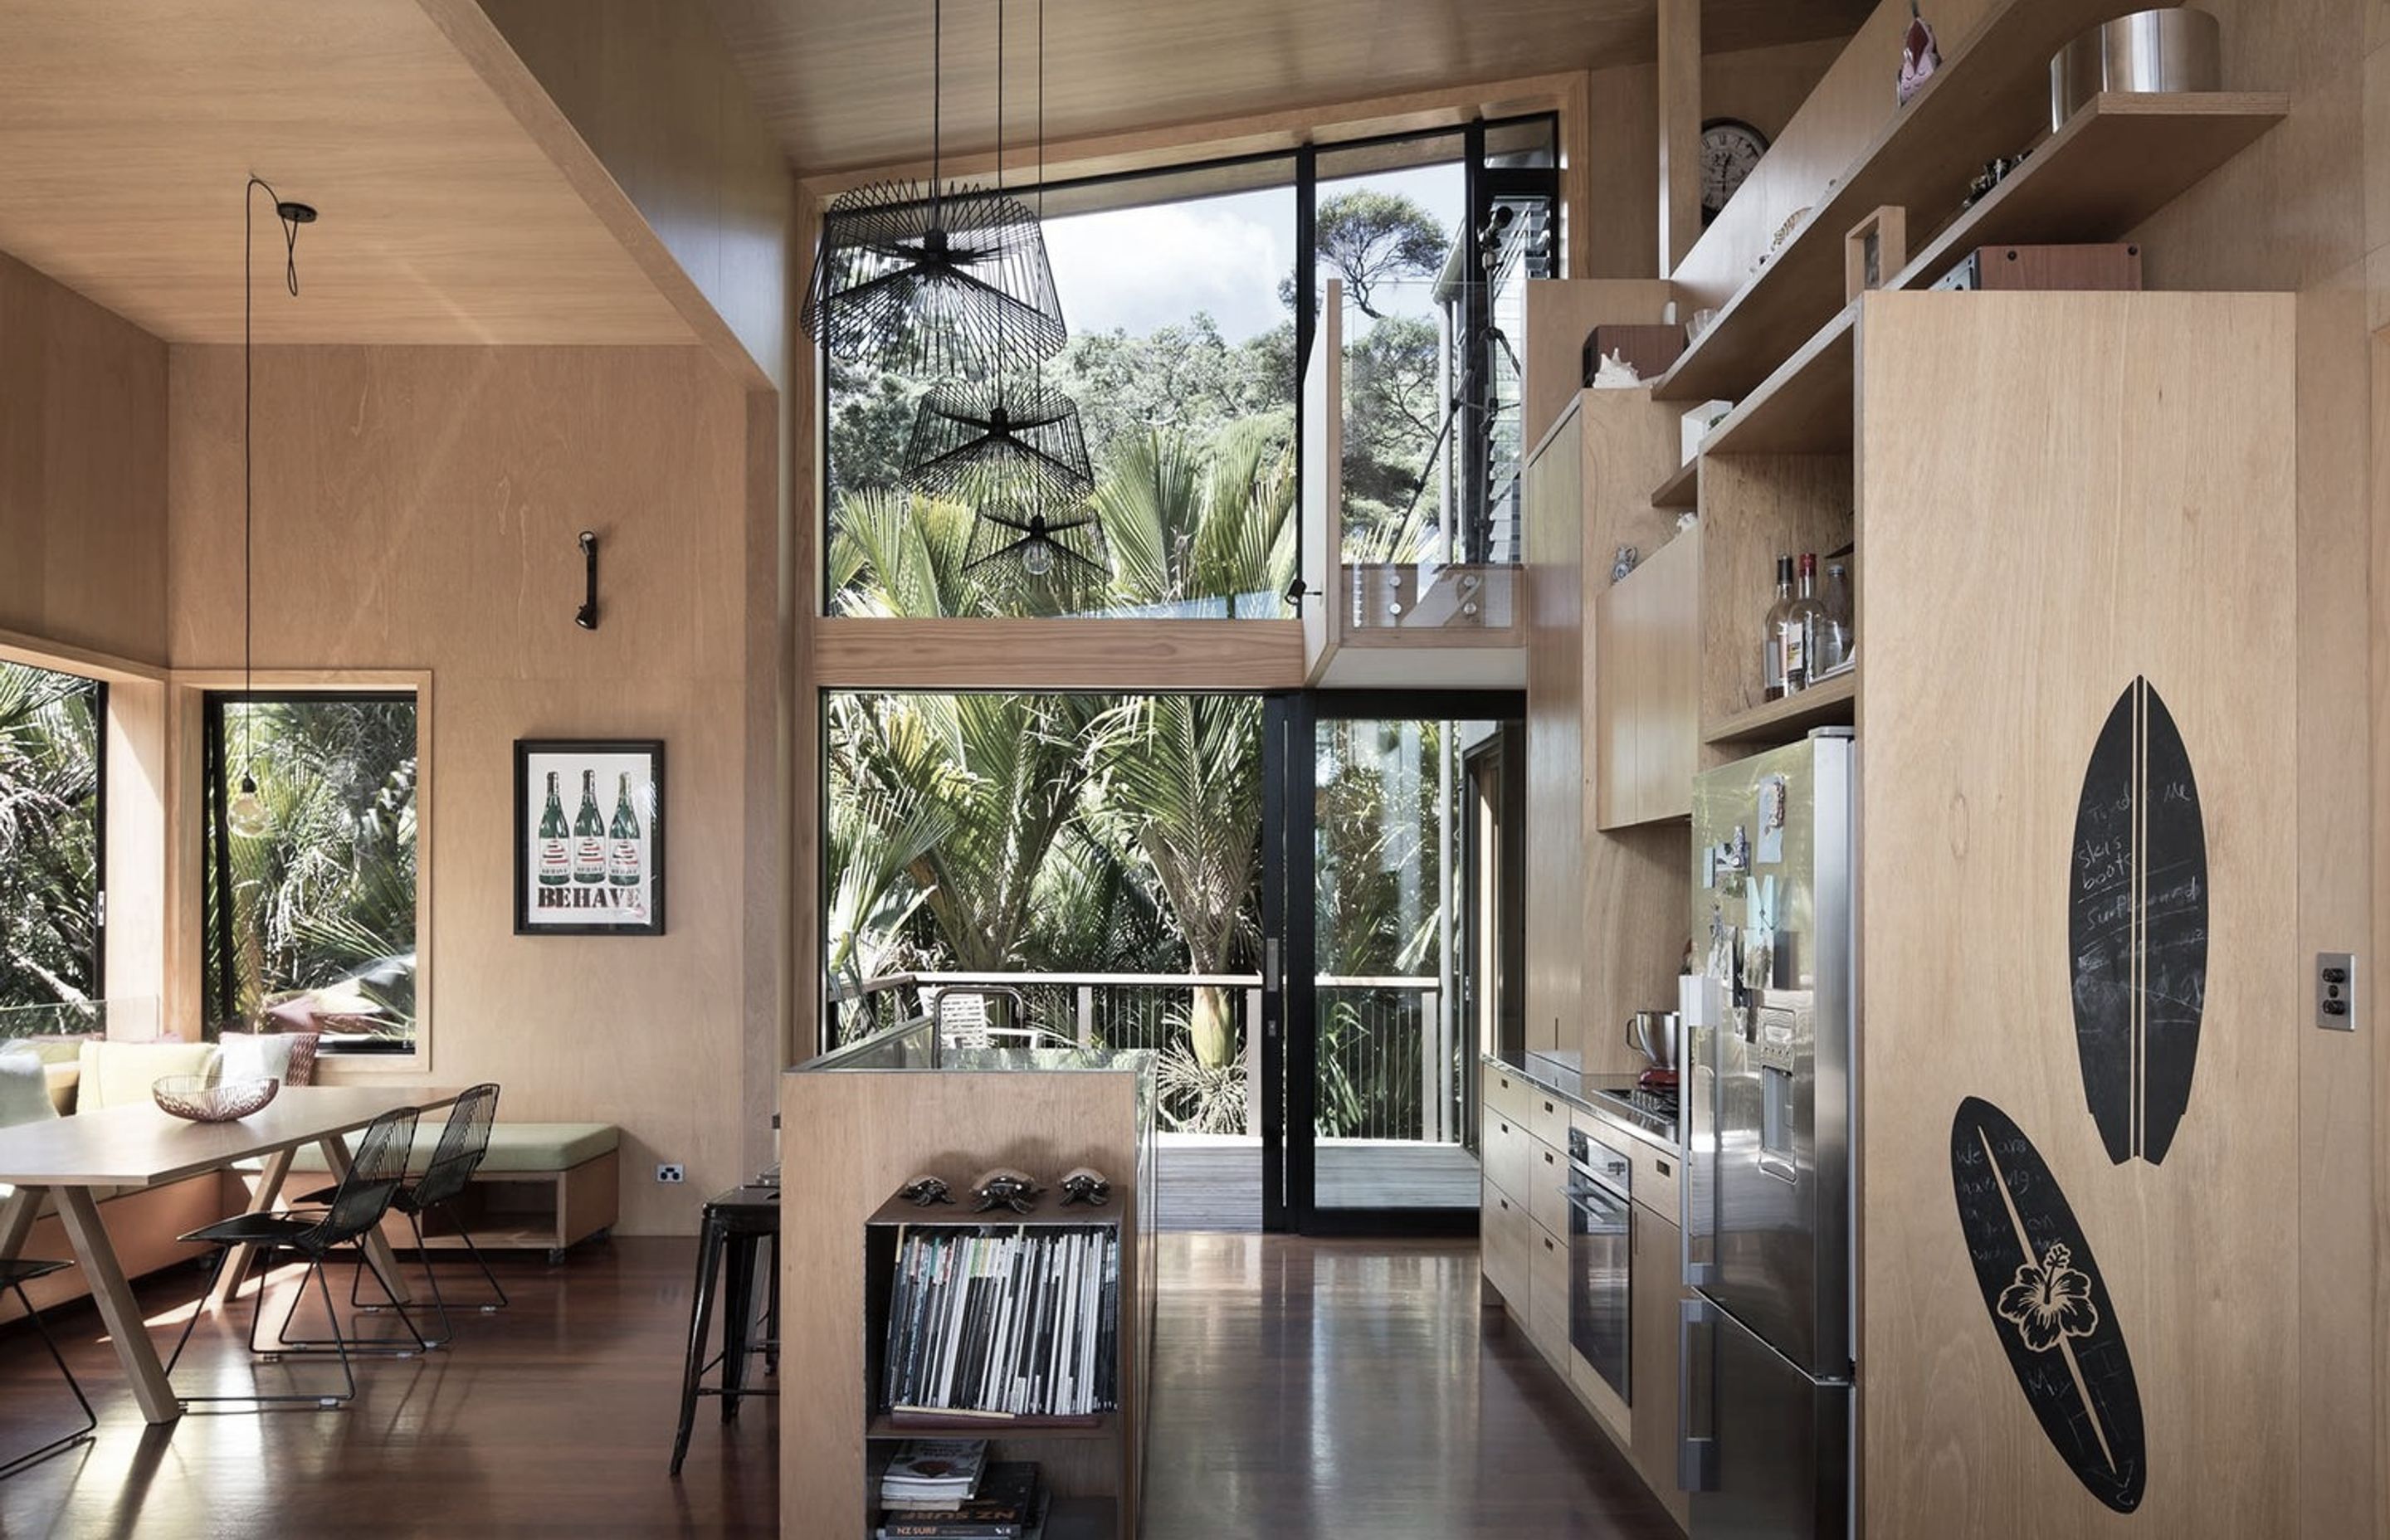 A high ceiling due to the mezzanine design creates a sense of space within the small footprint of the home. Extensive use of high-grade plywood compliments the bush environment the house exists in.